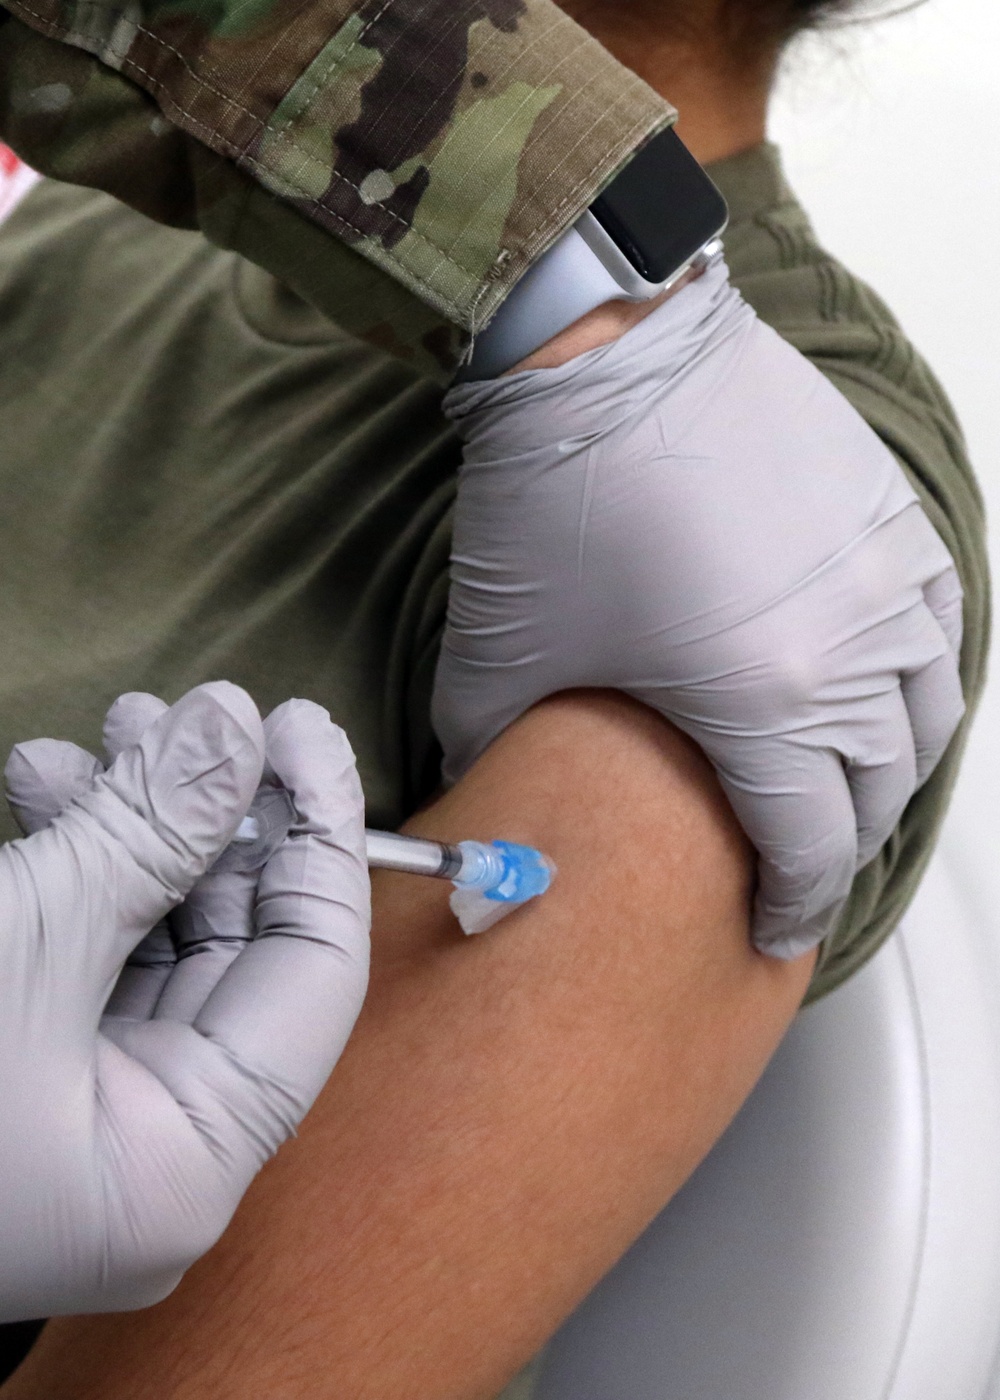 First Ohio National Guard members get COVID-19 vaccine